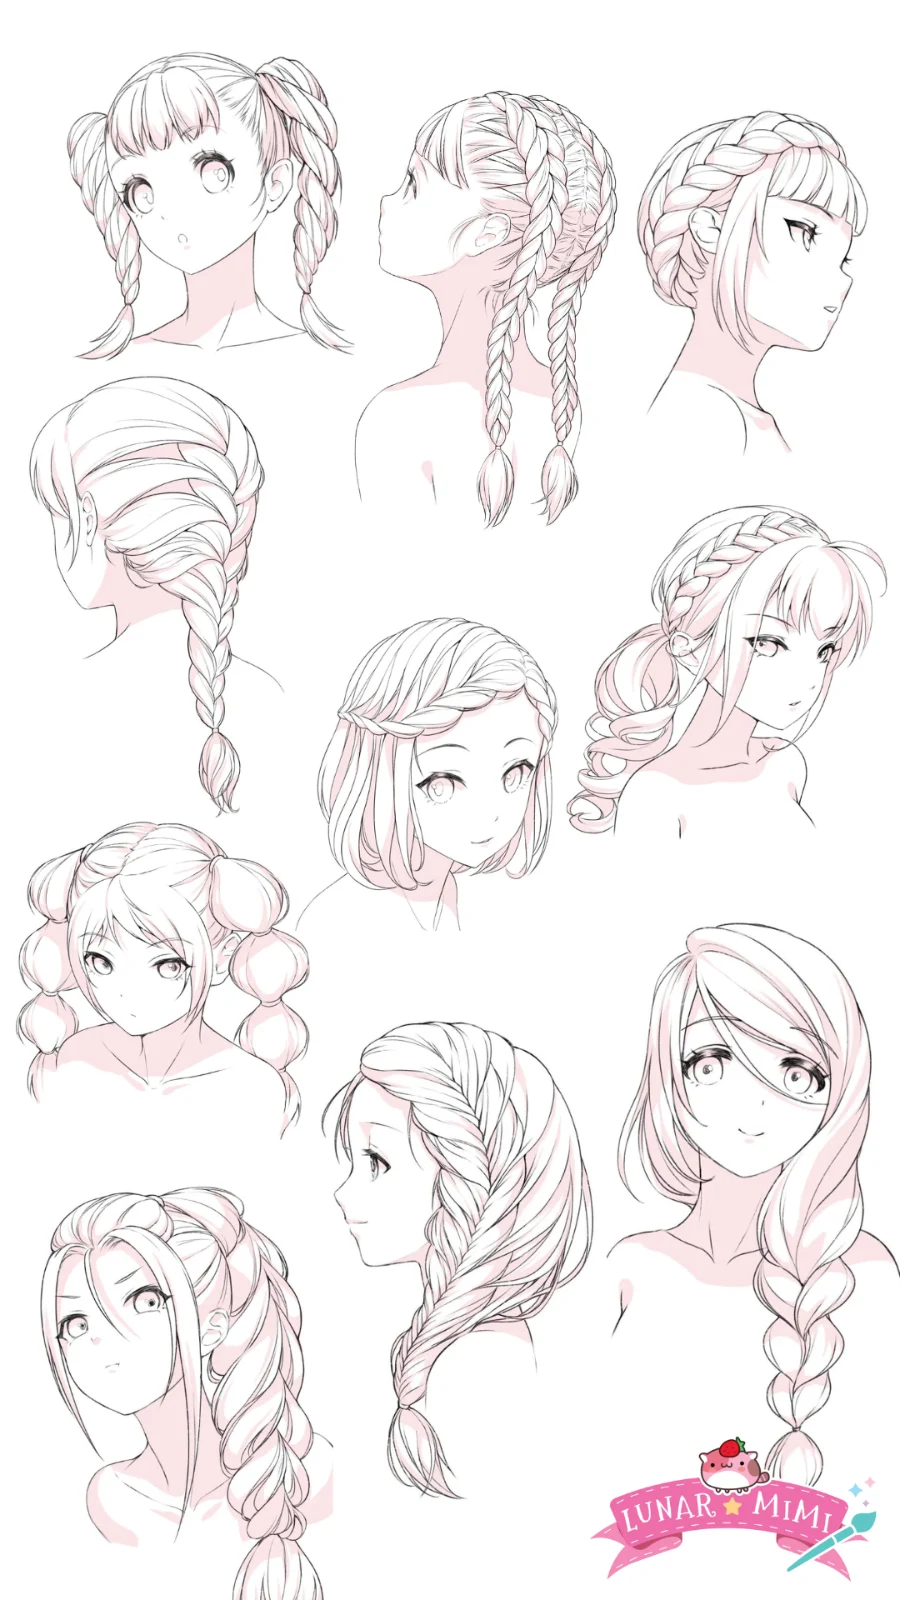 Why do a lot of dead anime moms have the same hairstyle? - Quora